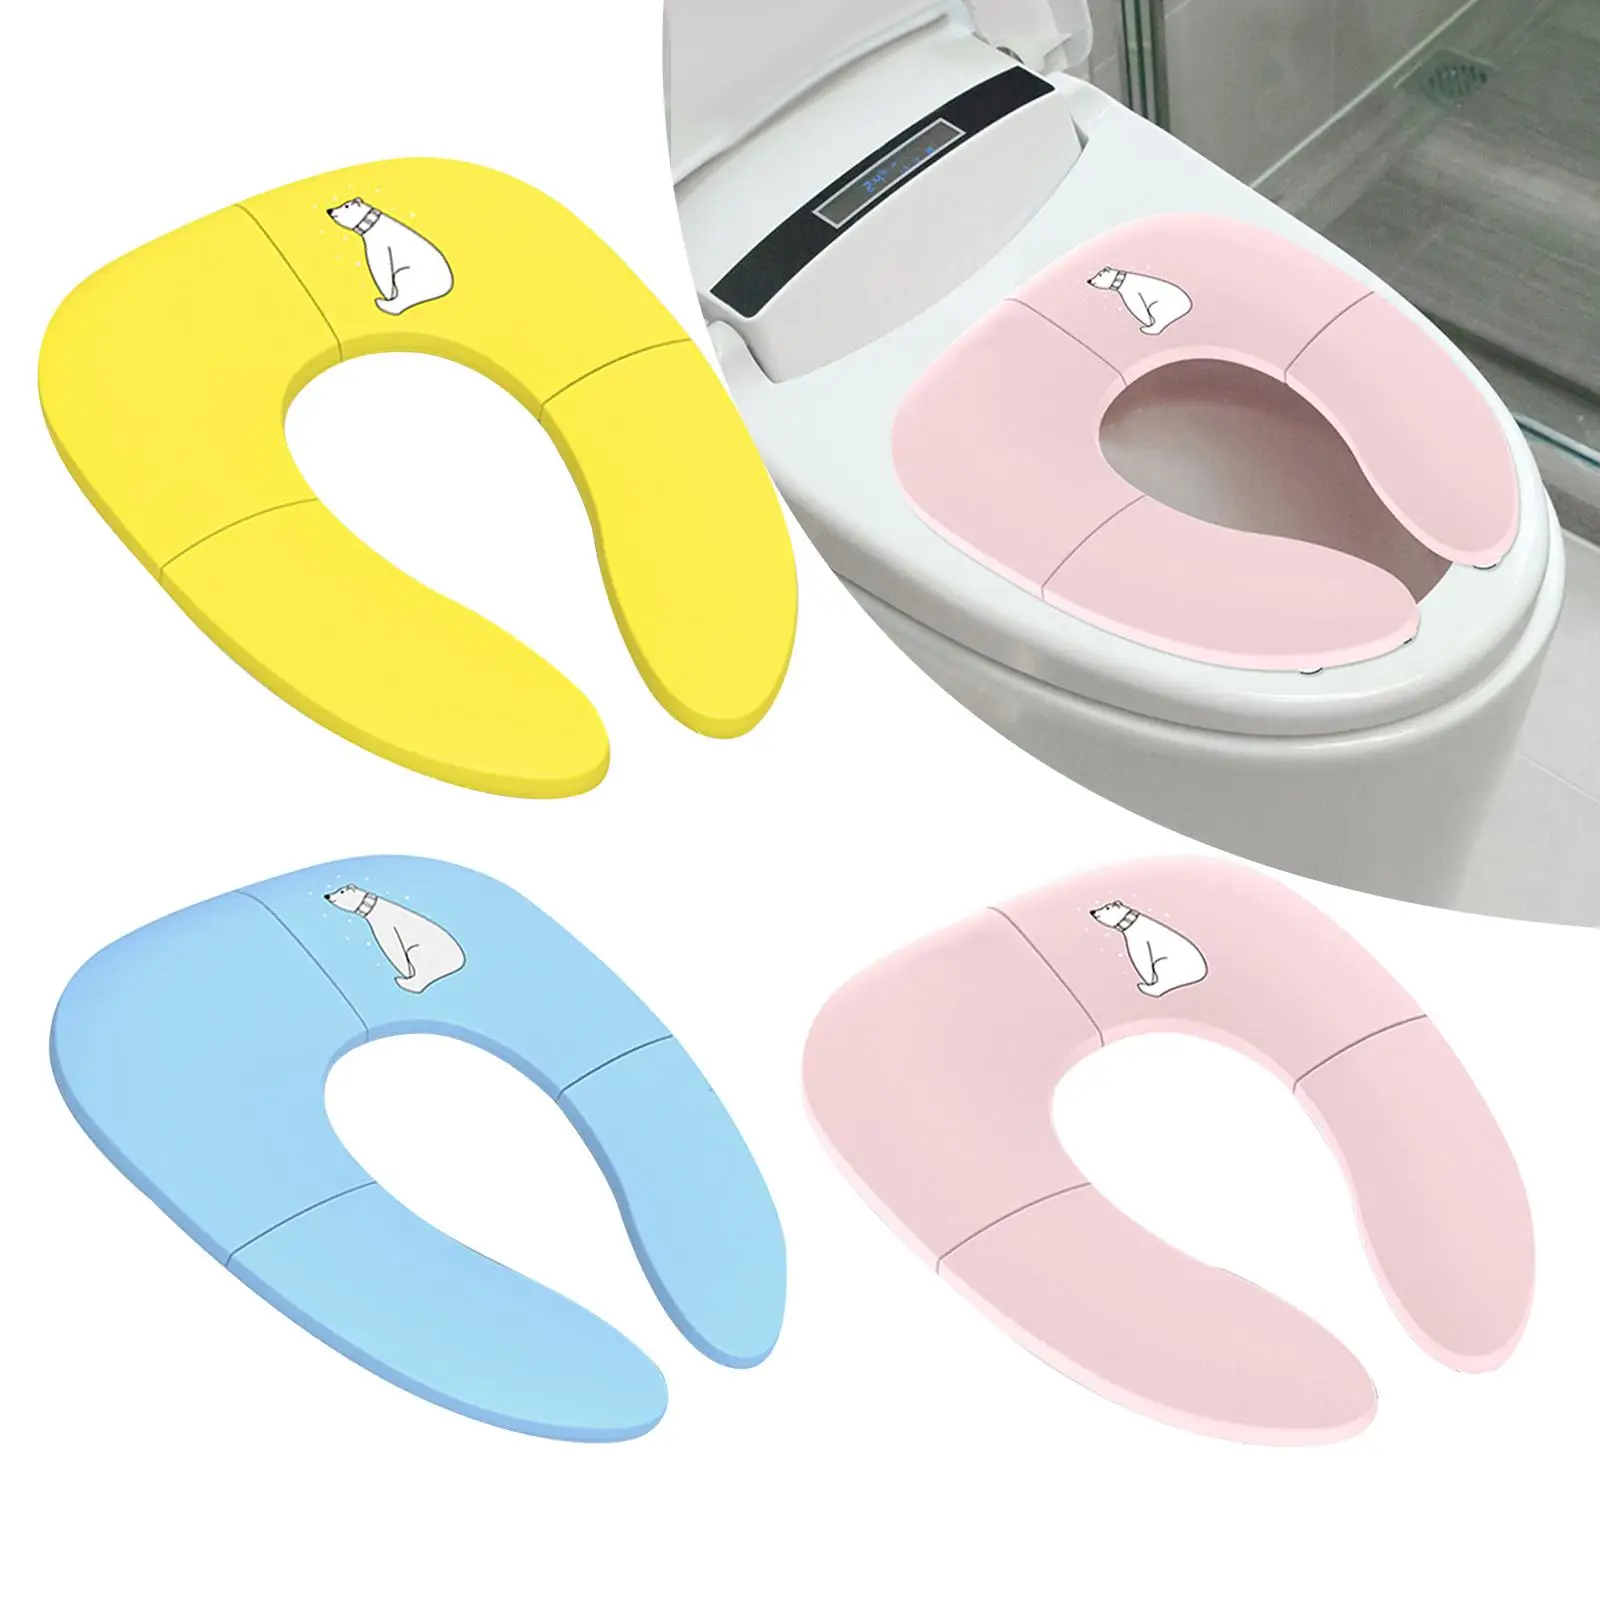 Toilet Portable Toilet pad Toilet Seat for Home Use Adults Girls